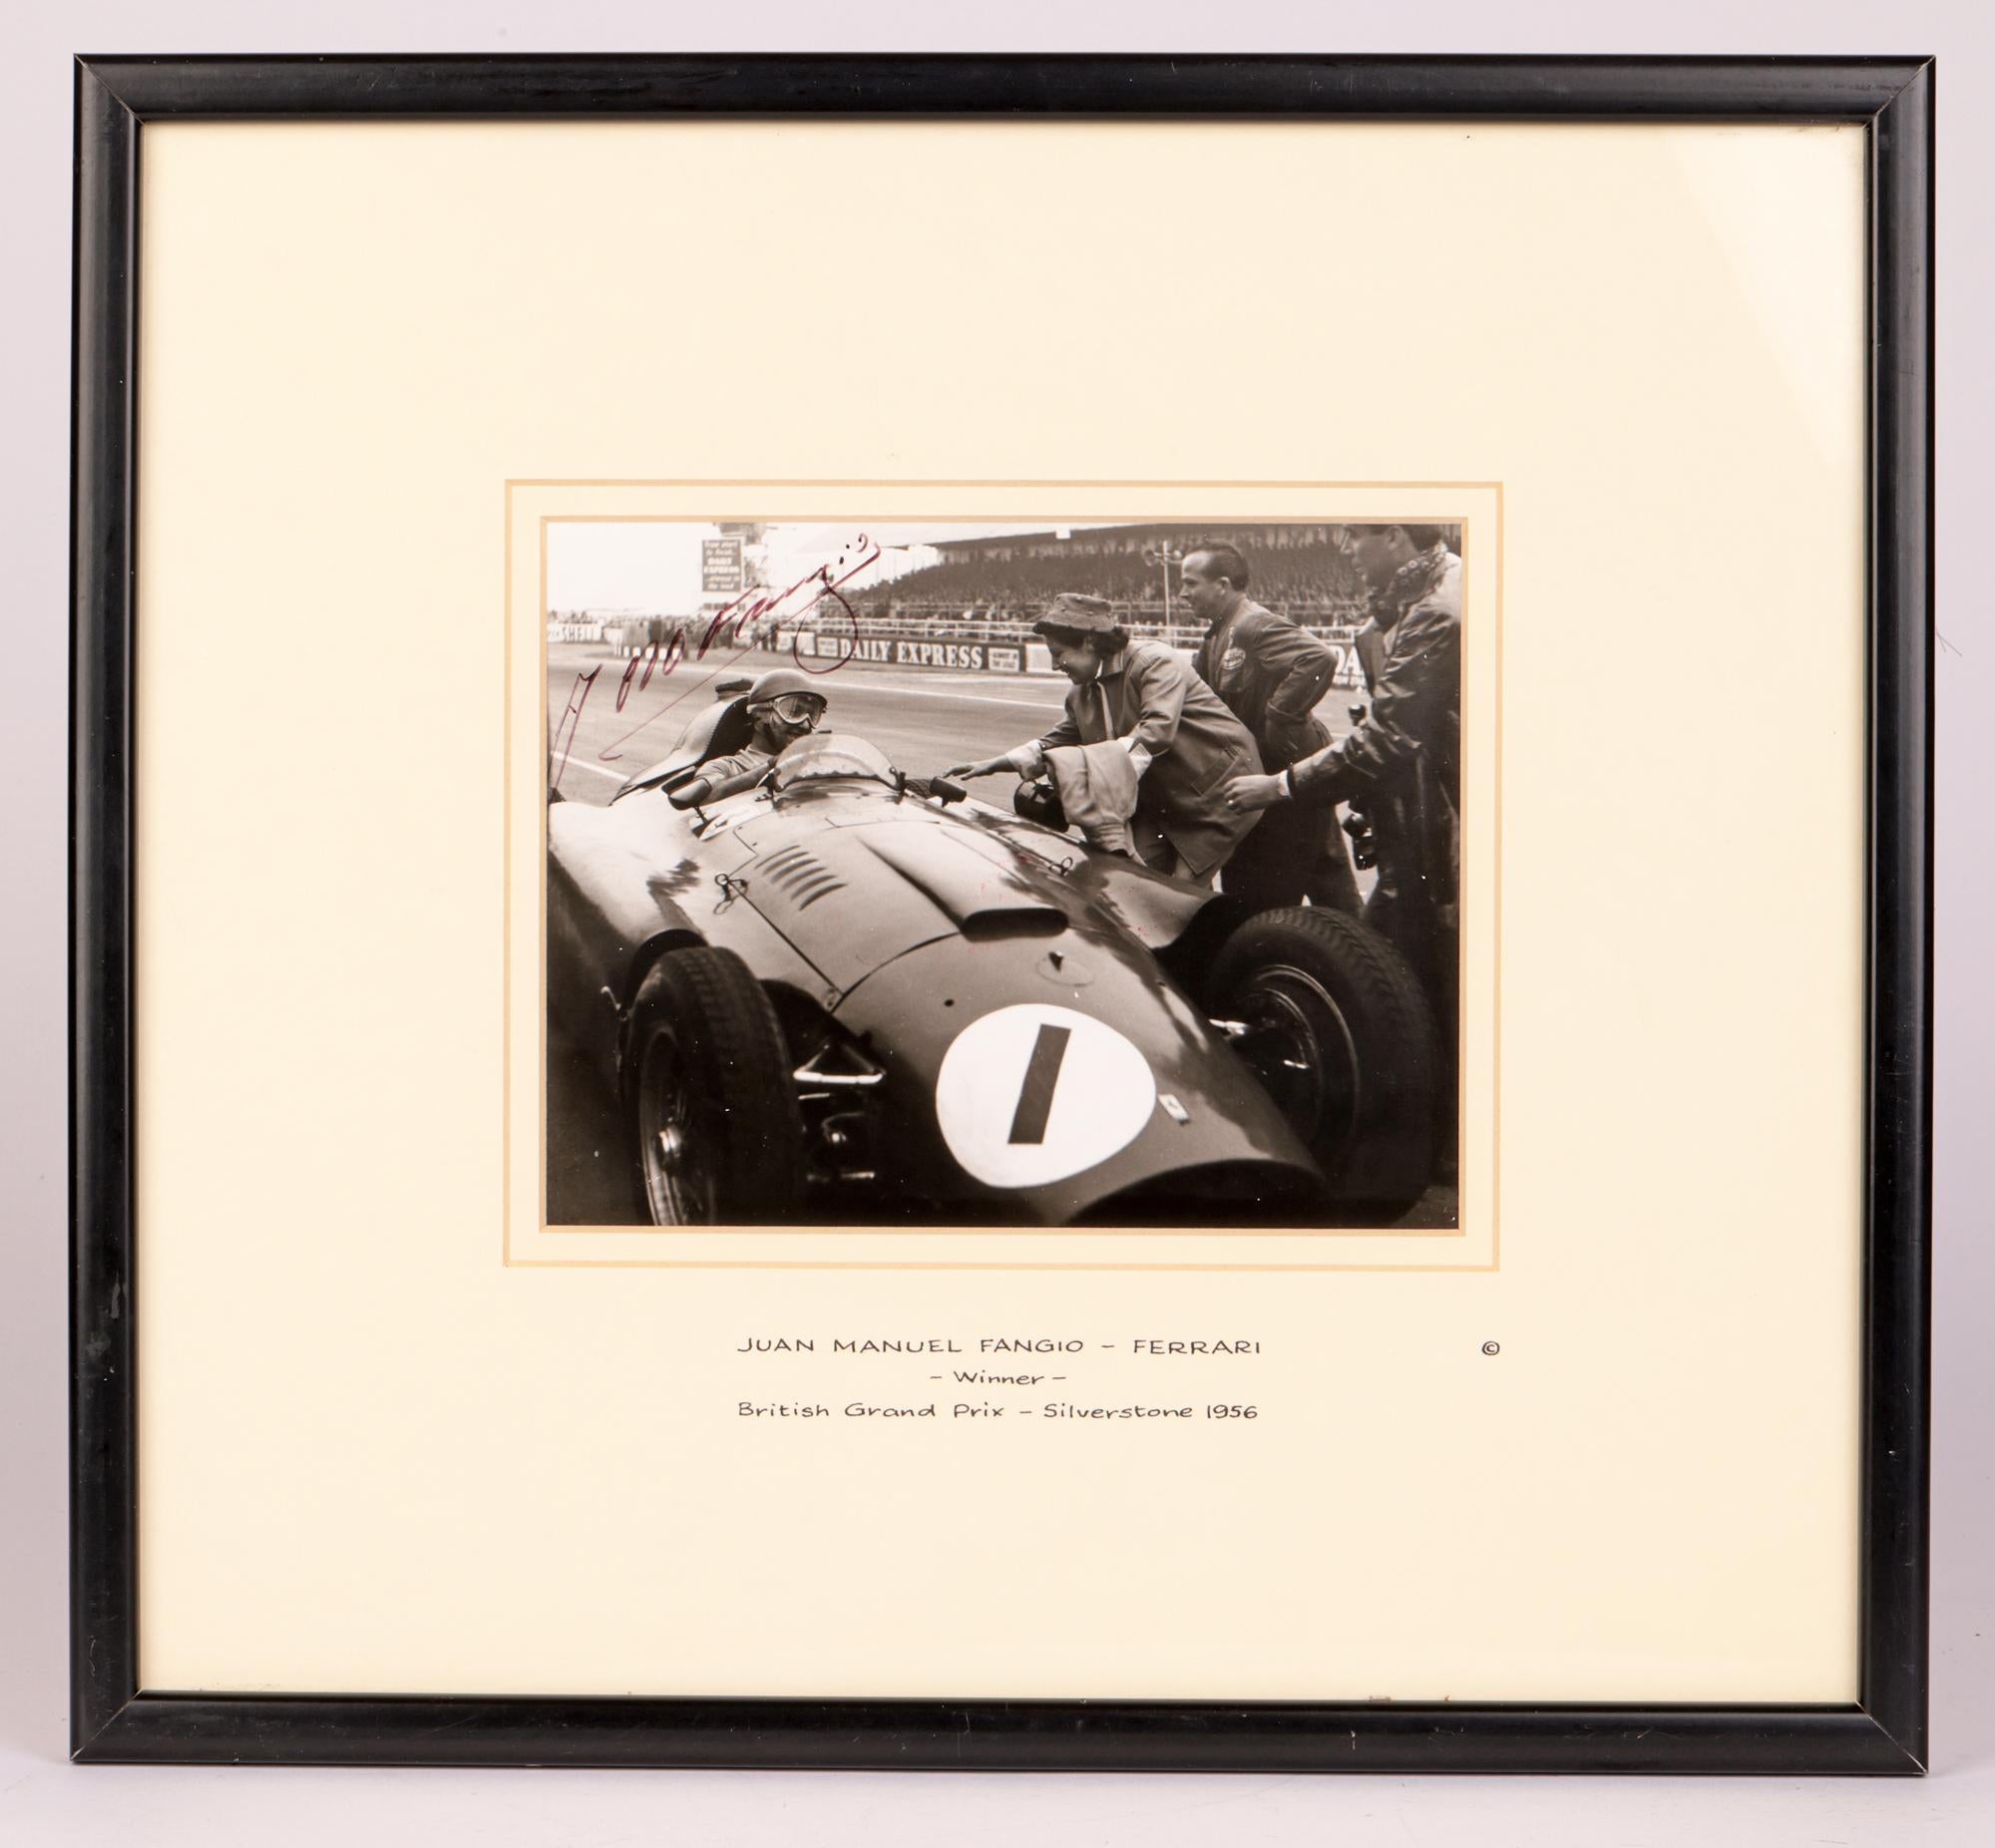 A superb piece of motoring history is this framed black and white silver gelatin print of Juan Manuel Fangio sat in his Ferrari and being congratulated following his victory in the British Grand Prix at Silverstone in 1956. The print is signed in